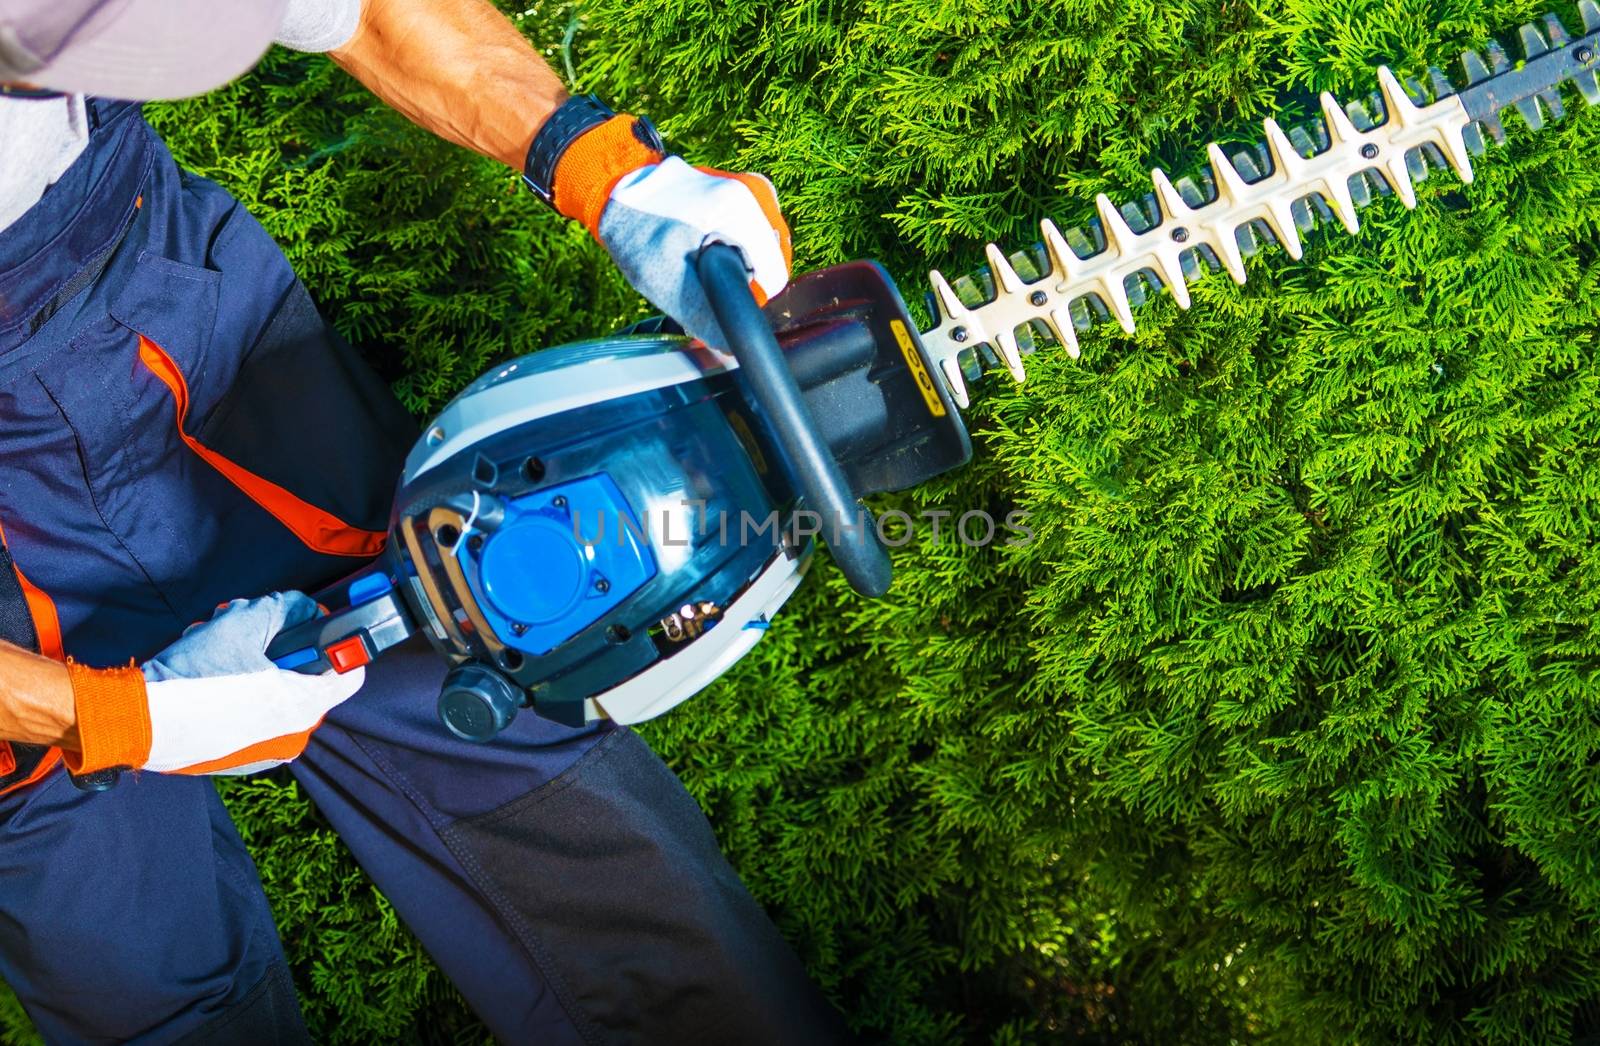 Trimming Time. Gardener with His Gasoline Hedge Trimmer in Action. 